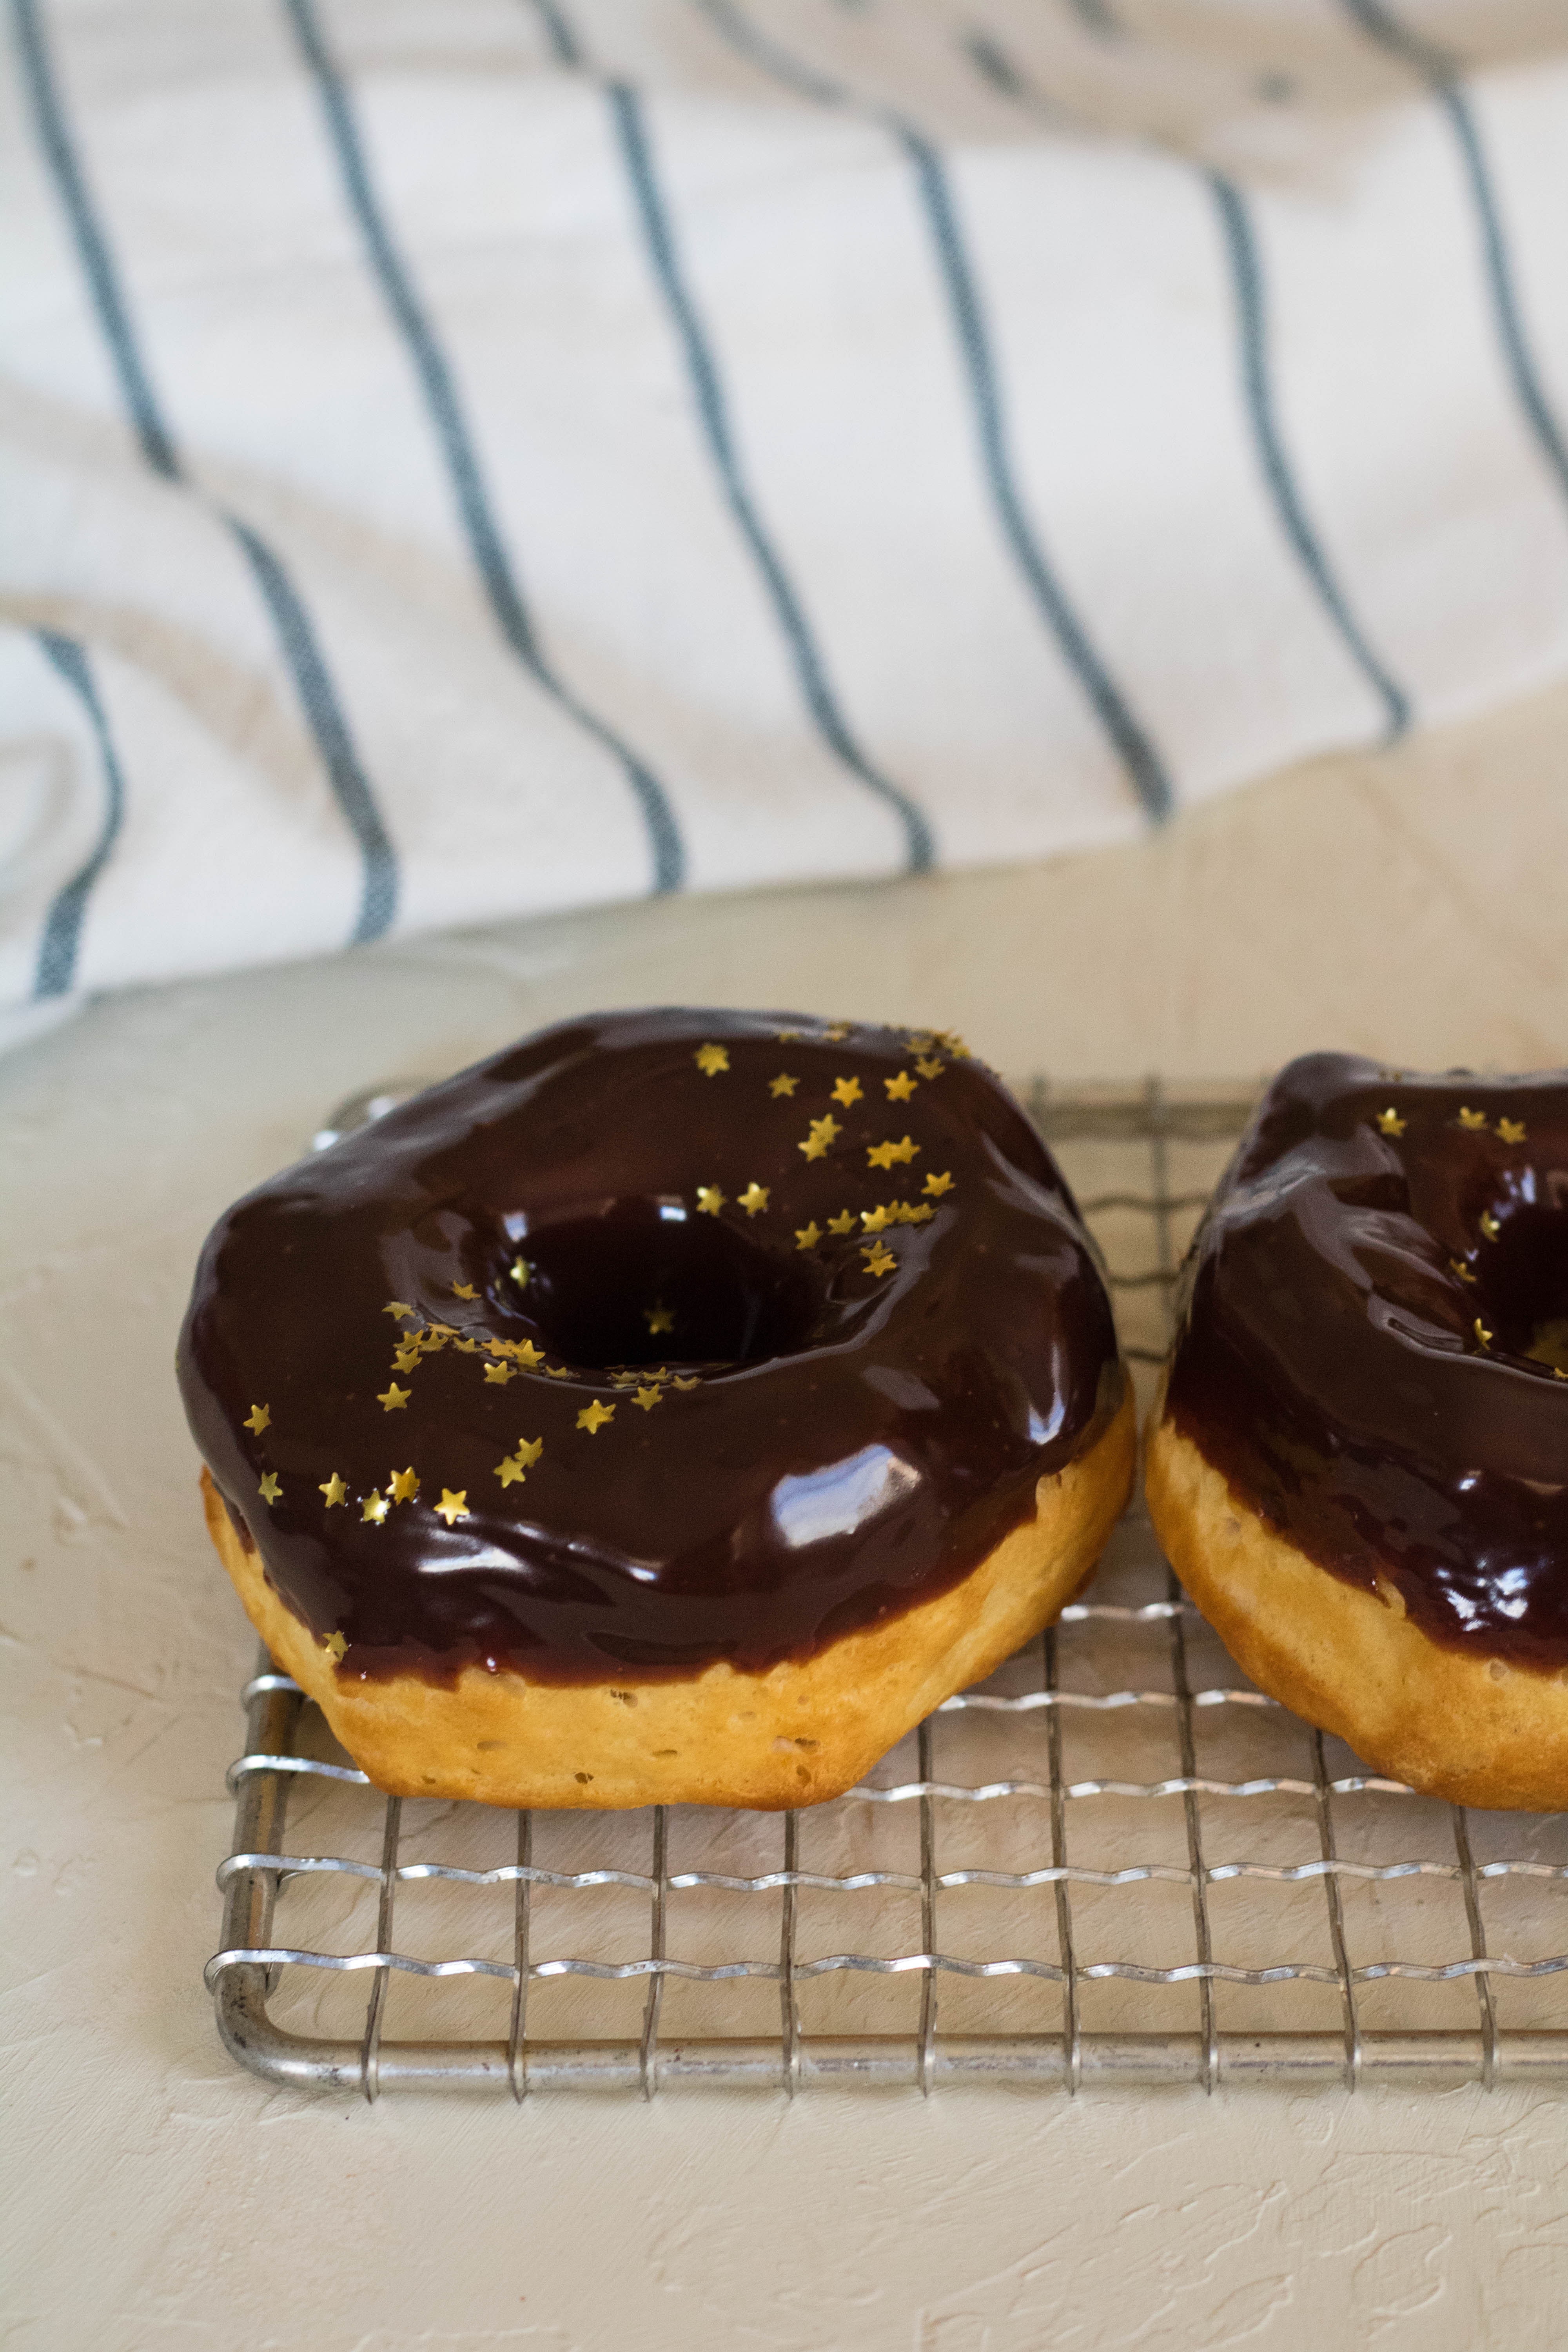 air fryer biscuit donuts with chocolate ganache and golden stars